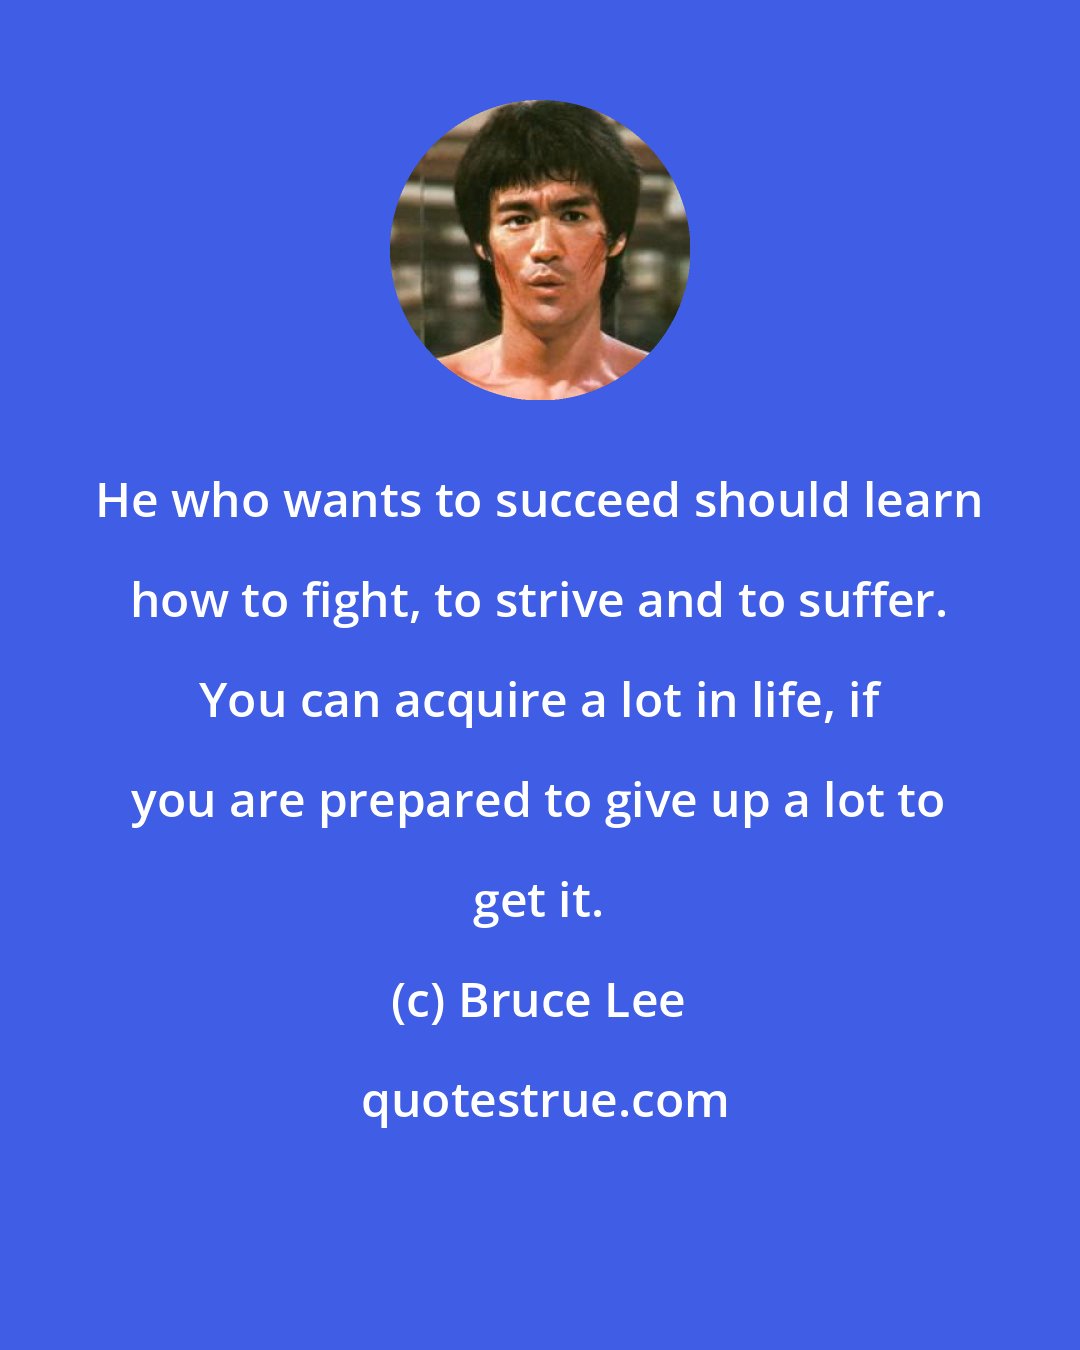 Bruce Lee: He who wants to succeed should learn how to fight, to strive and to suffer. You can acquire a lot in life, if you are prepared to give up a lot to get it.